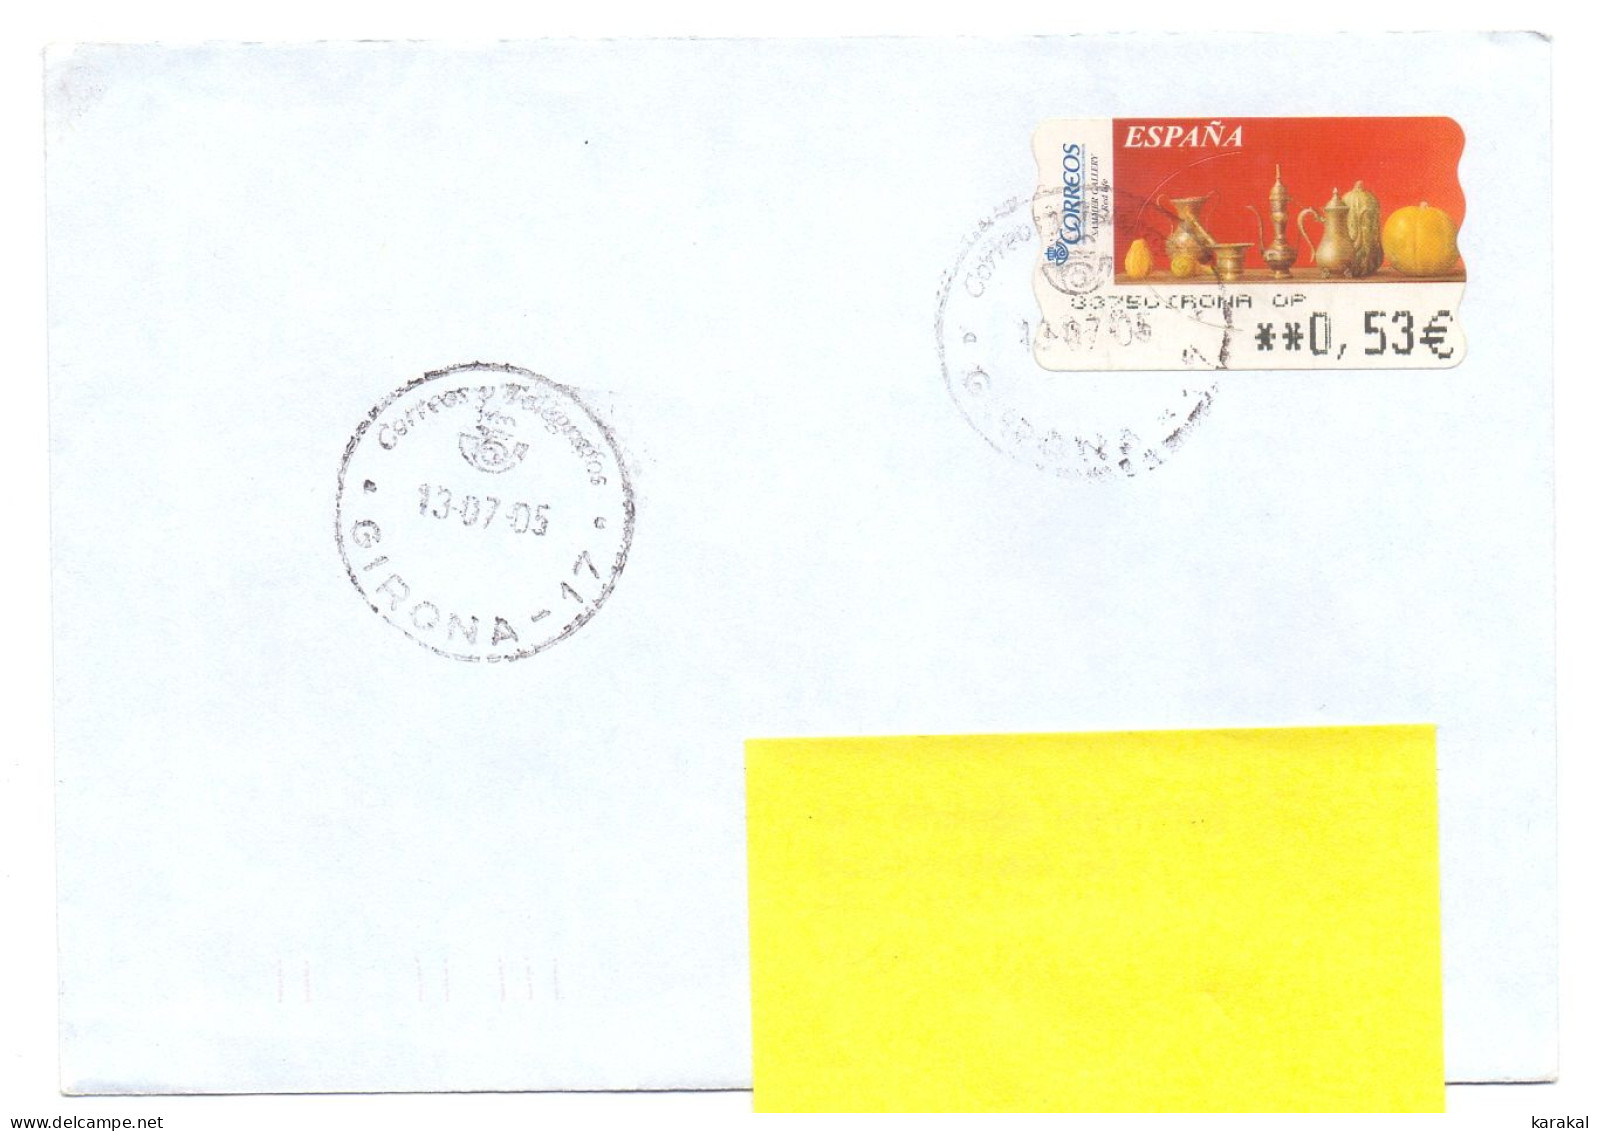 Spain ATM Red Life 2004 On Letter From Girona To Belgium - Viñetas De Franqueo [ATM]